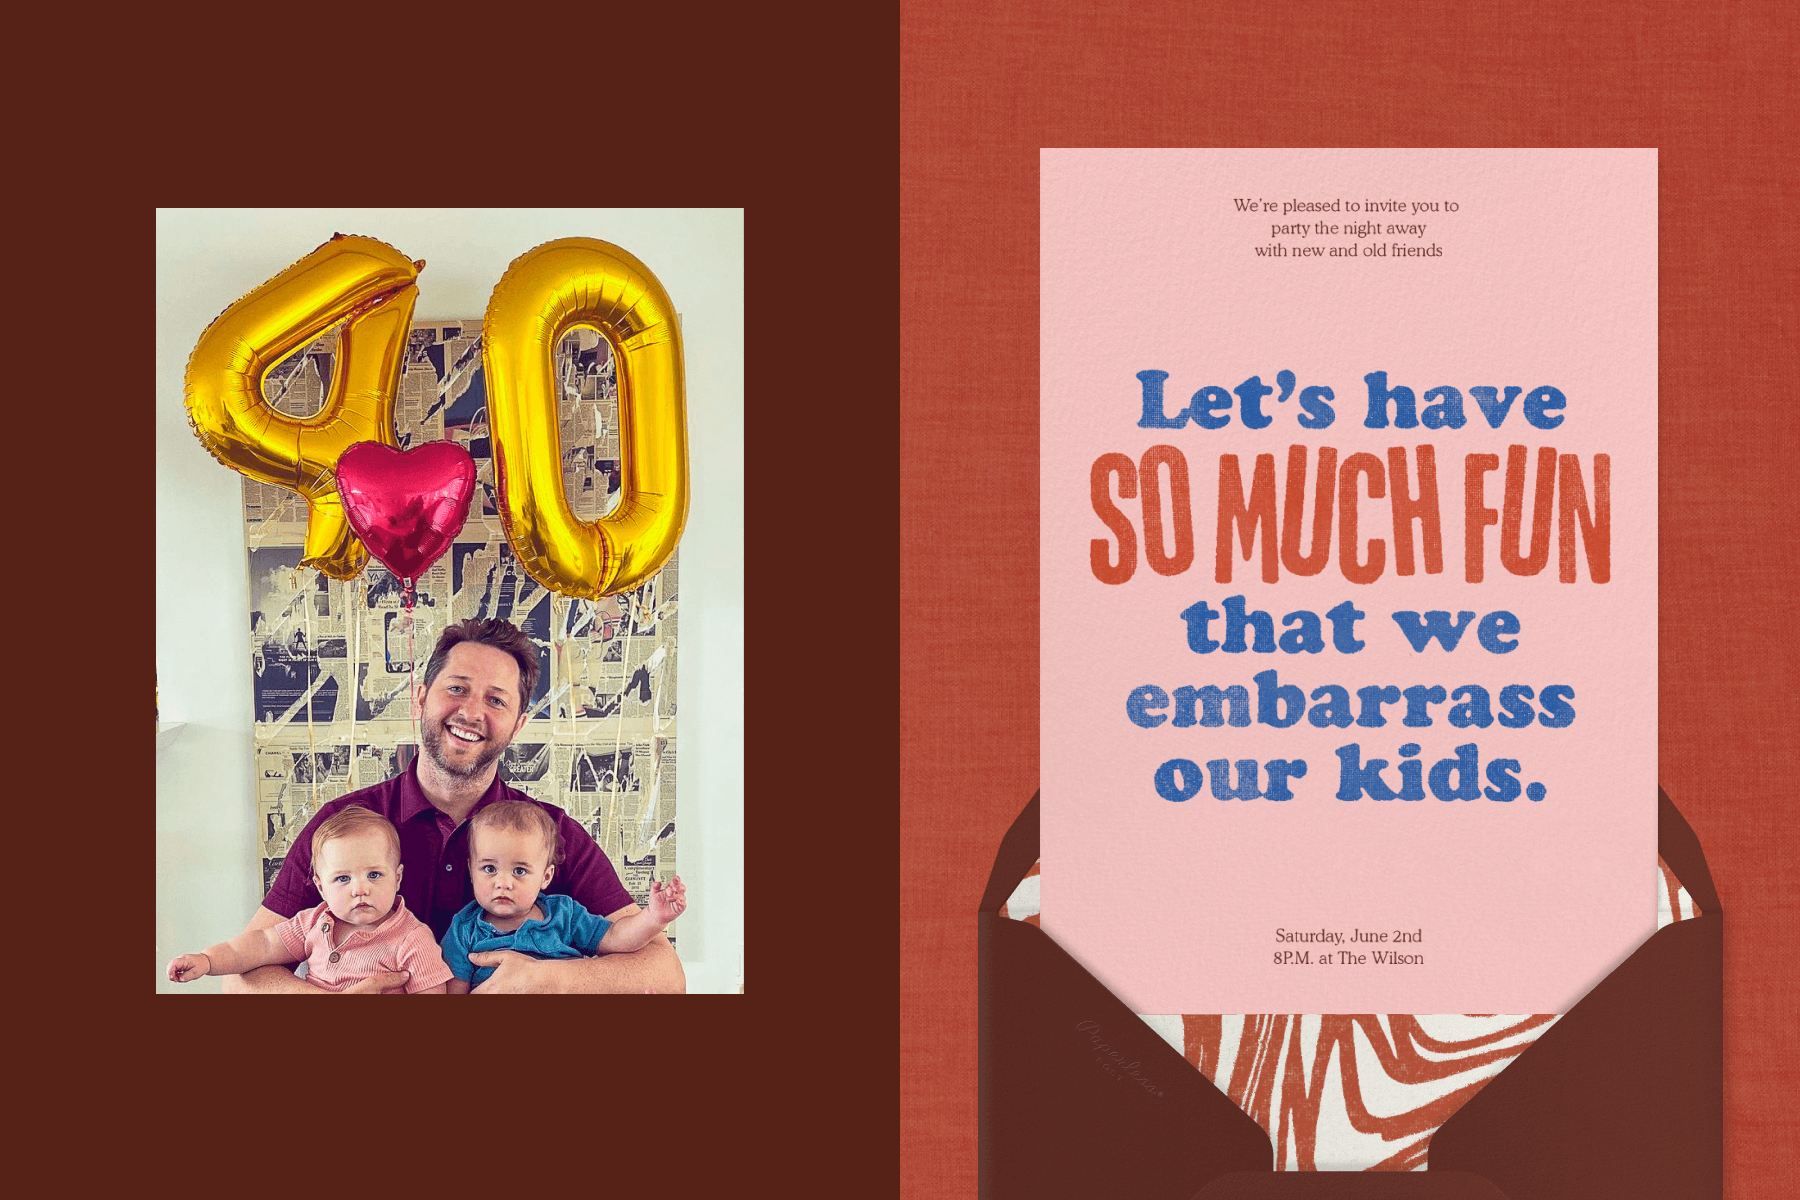 Left: Derek Blasberg and his twin babies sitting under number "40" birthday balloons; Right: Party invitation that reads, "let's have so much fun that we embarrass our kids," on a pink background with a maroon envelope featuring a red and white liner. 